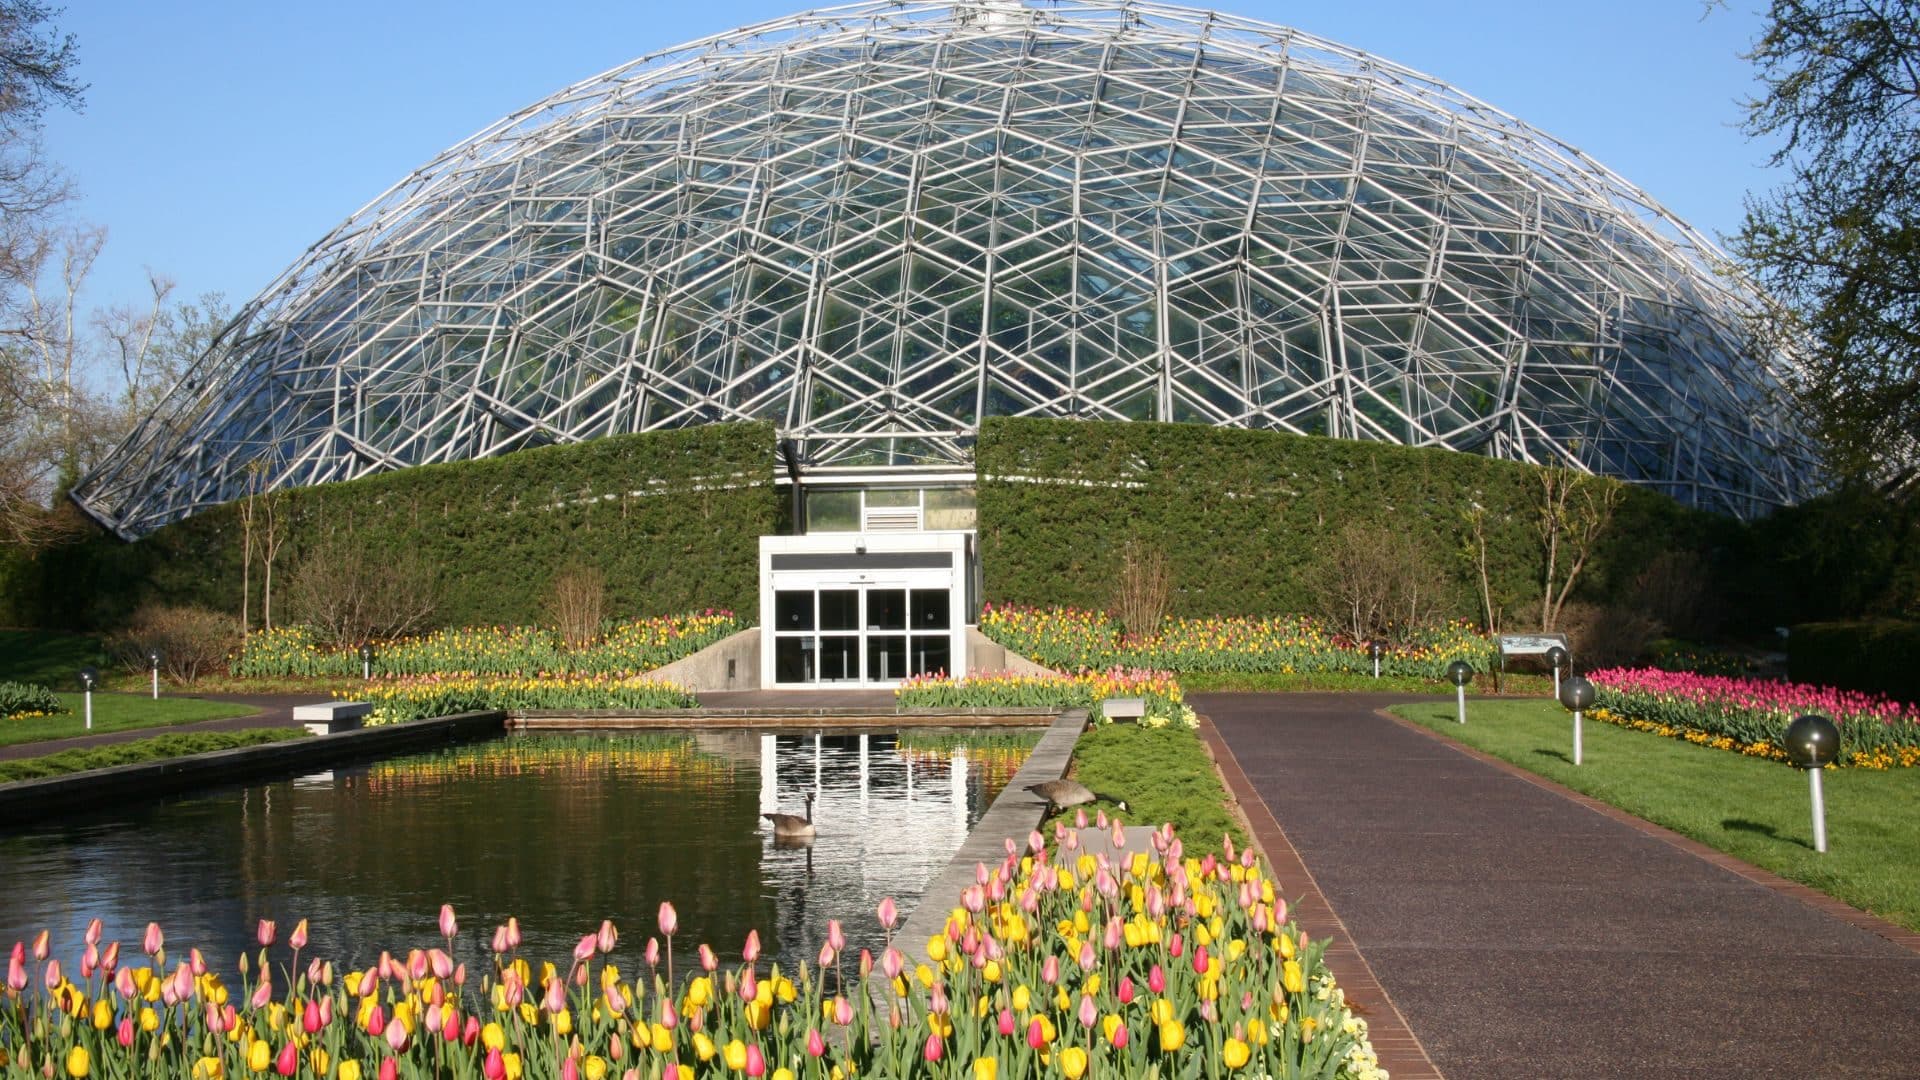 Large, white Climatron Geodesic Dome Conservatory surrounded by plants, flowers and trees.